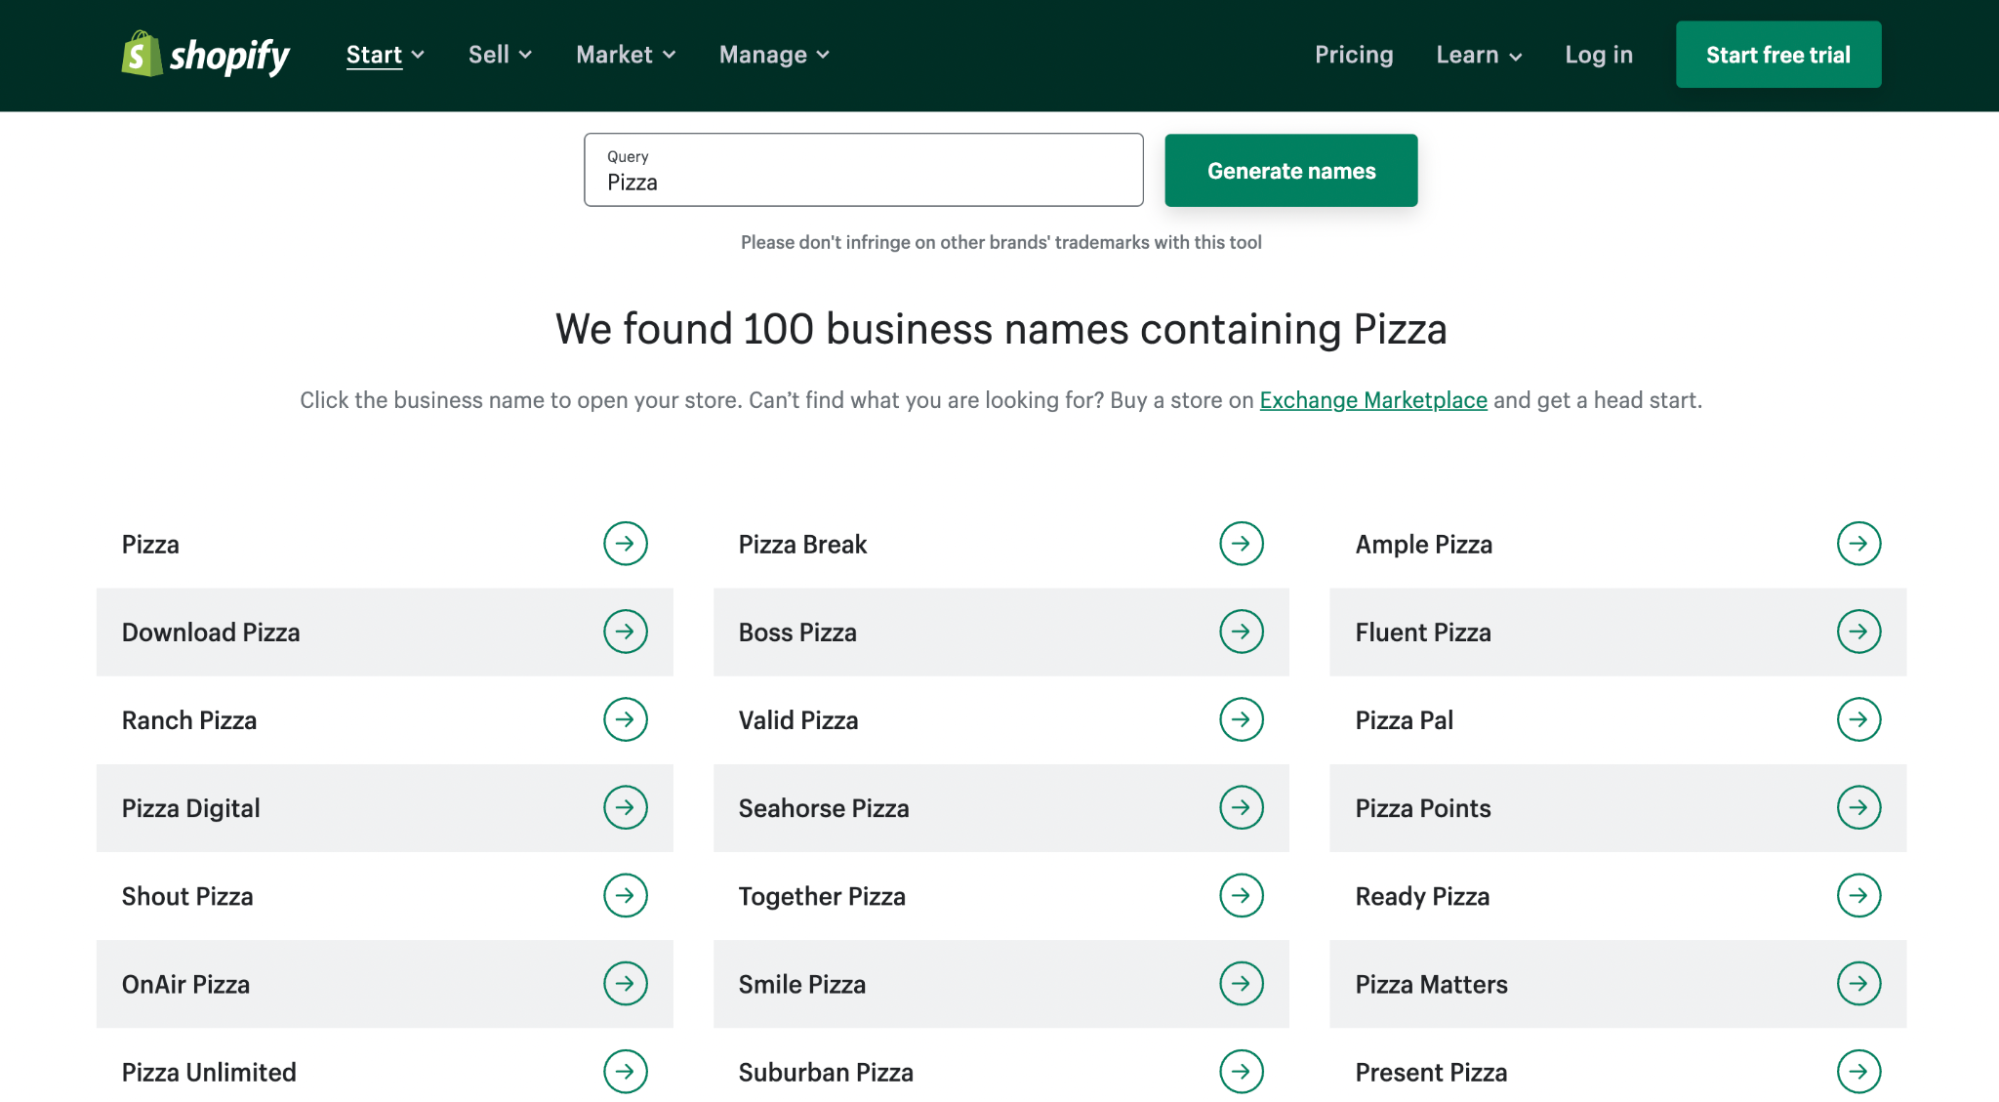 Business Name Generator - From Shopify Tool To Customer with One Click